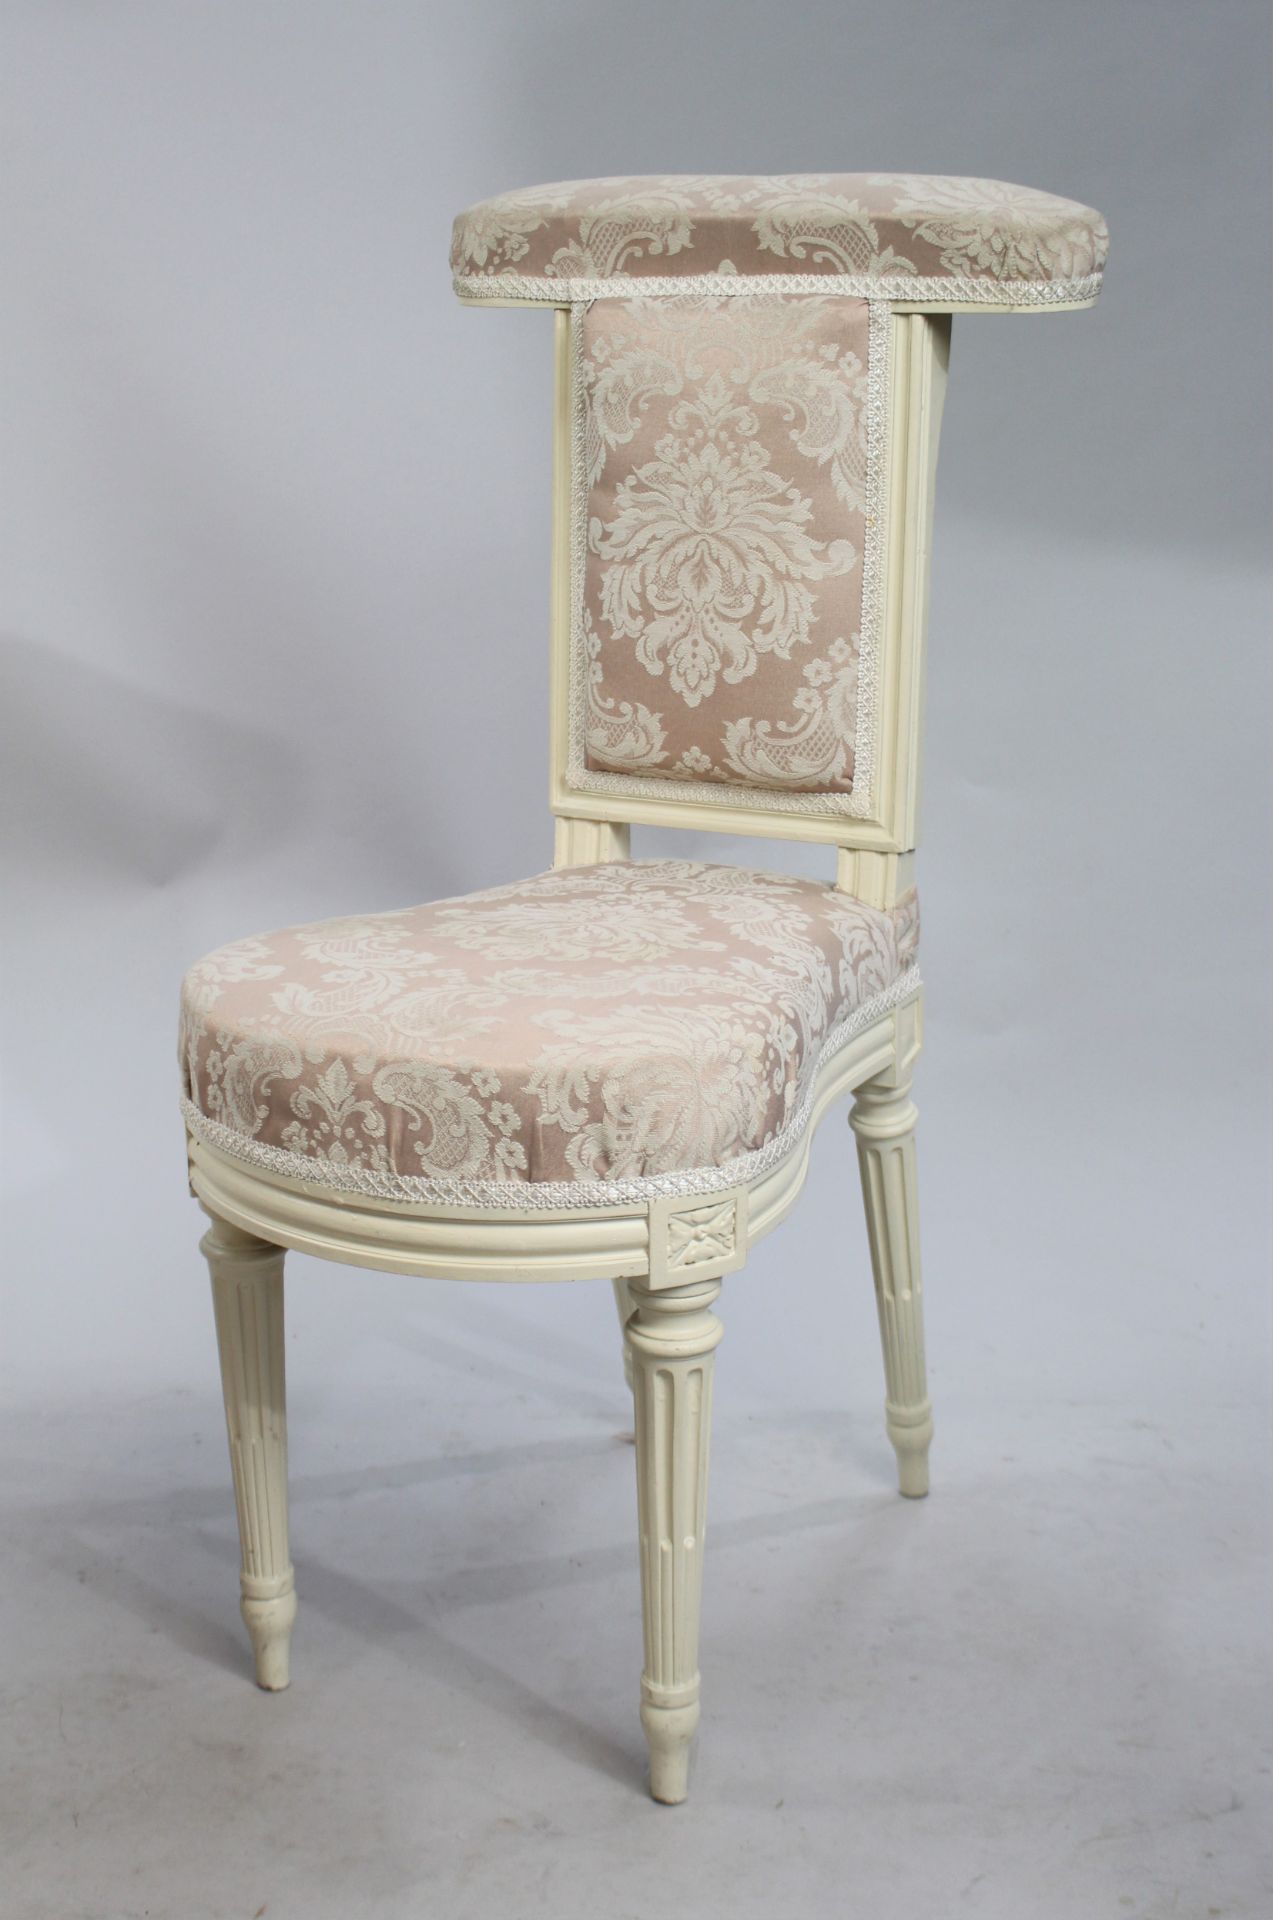 Pair of Early Antique French Painted Voyeuse Chairs - Image 4 of 7